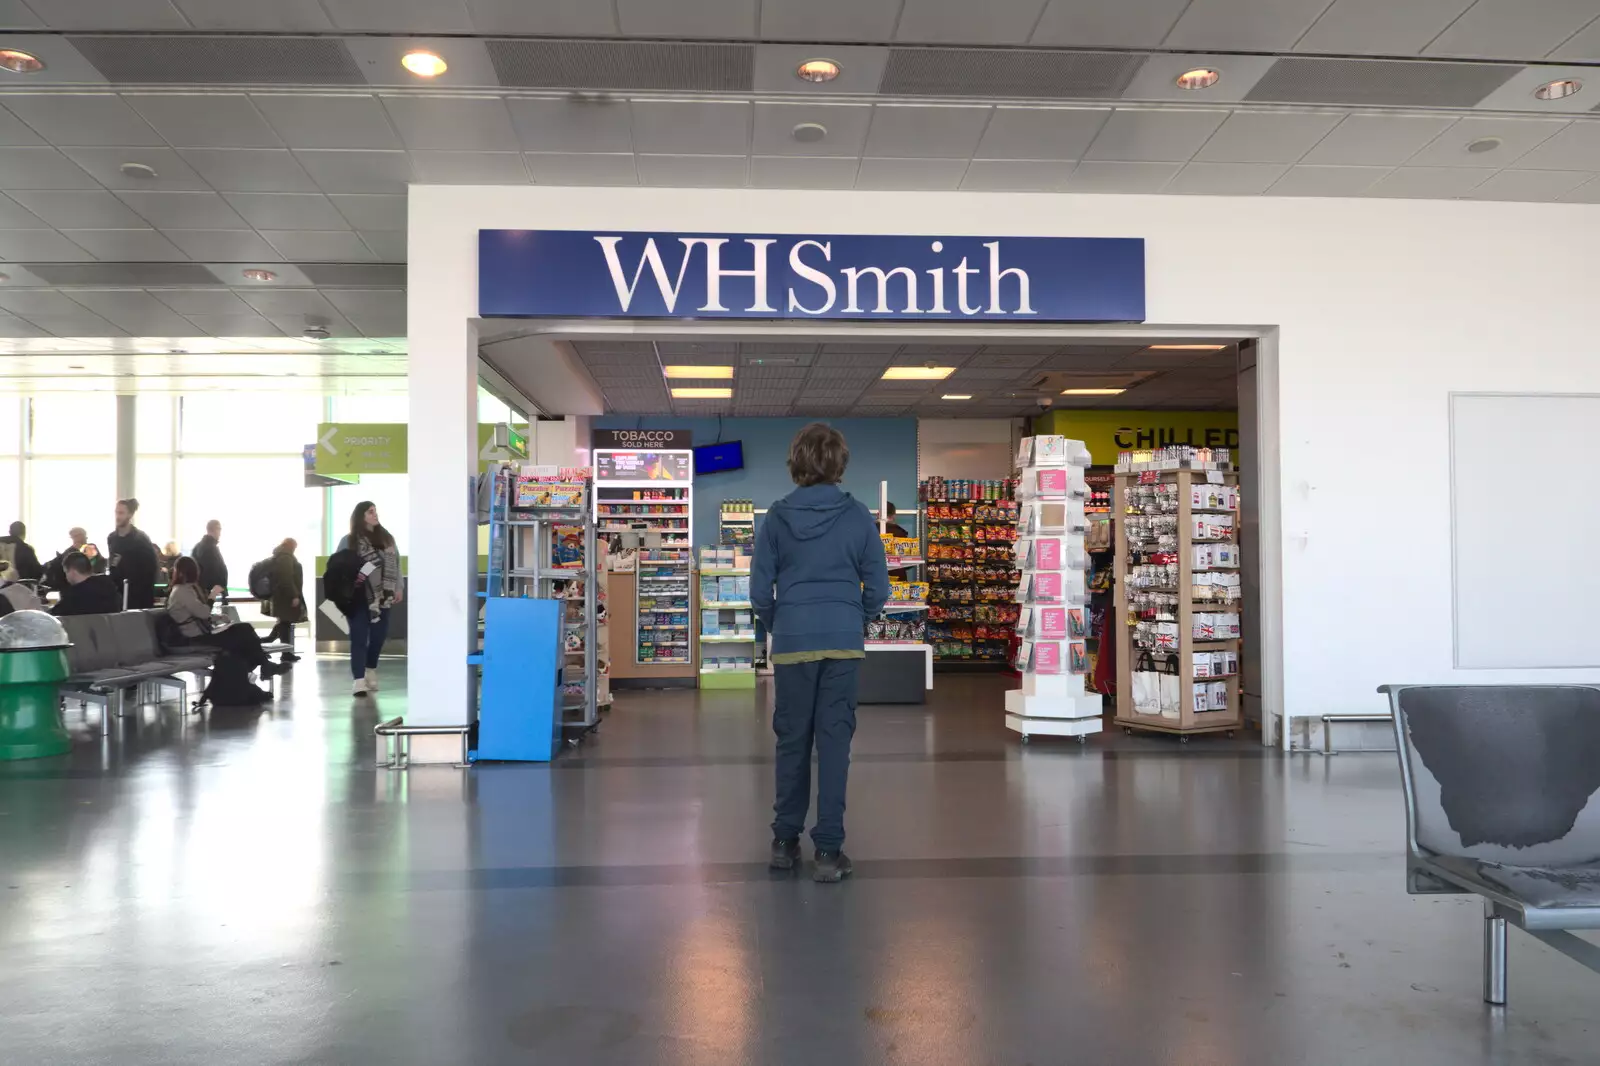 Fred surveys a WHSmith near our gate, from Blackrock North and Newgrange, County Louth, Ireland - 16th February 2023